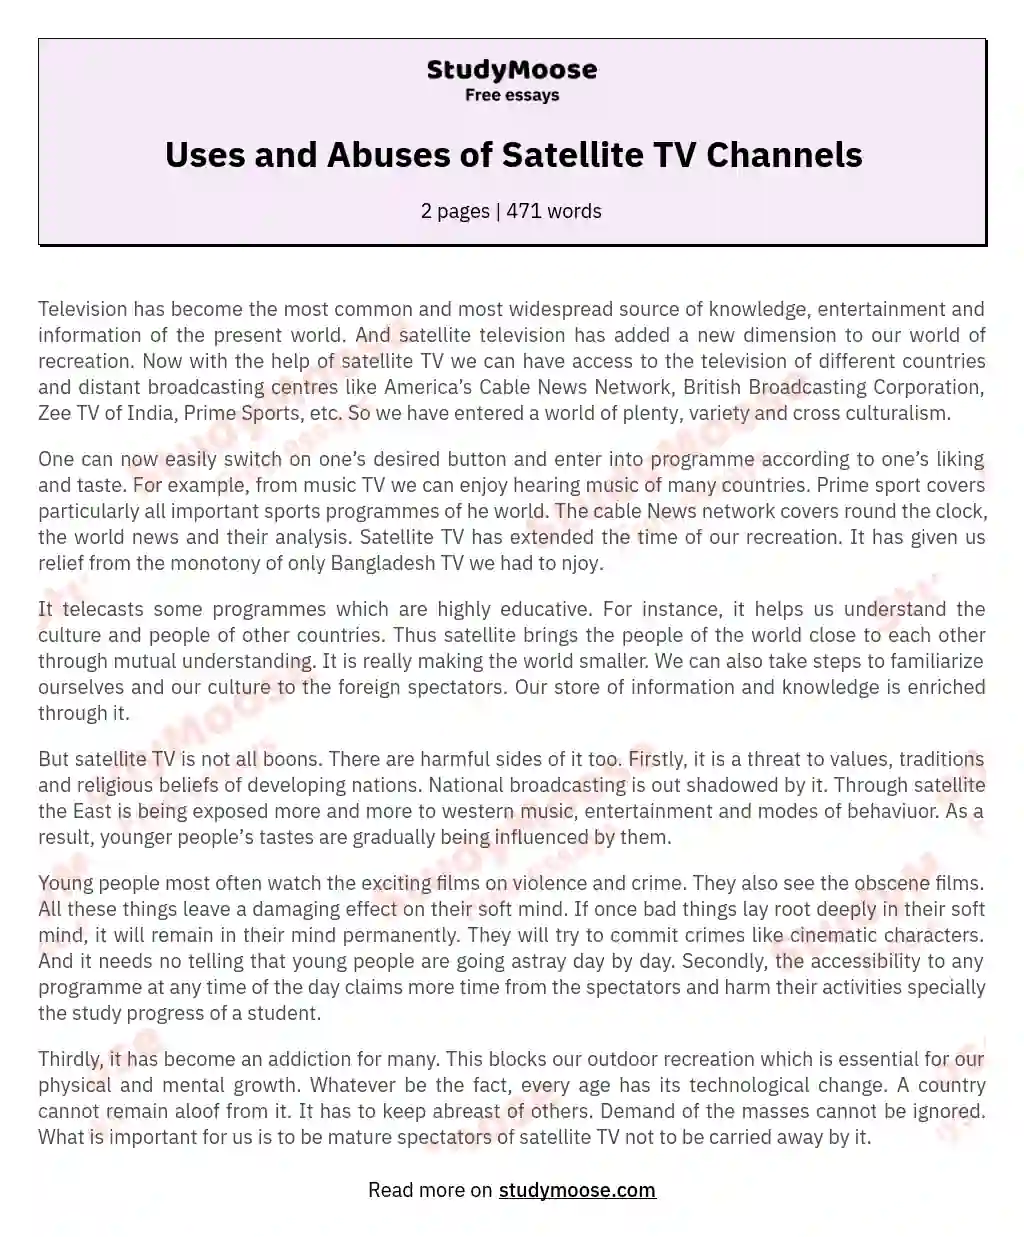 Uses and Abuses of Satellite TV Channels essay